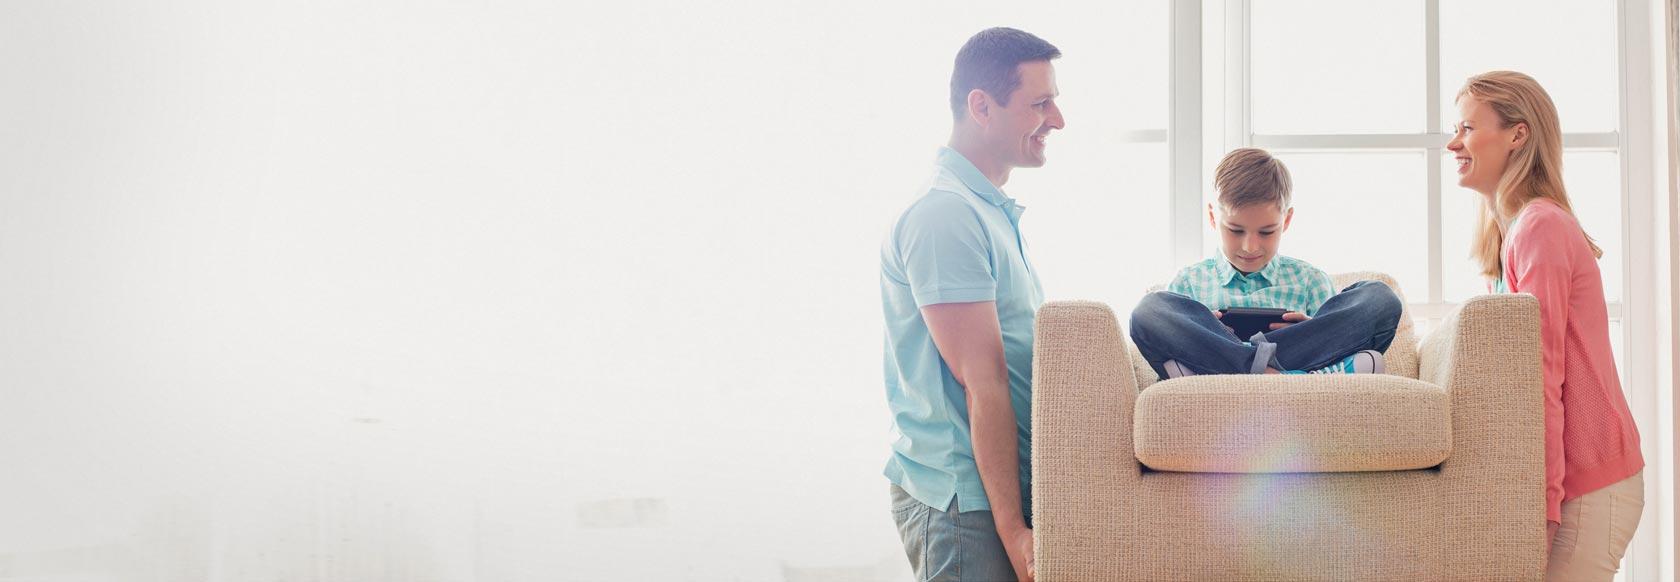 Mother and father moving couch with young son sitting on it, smiling